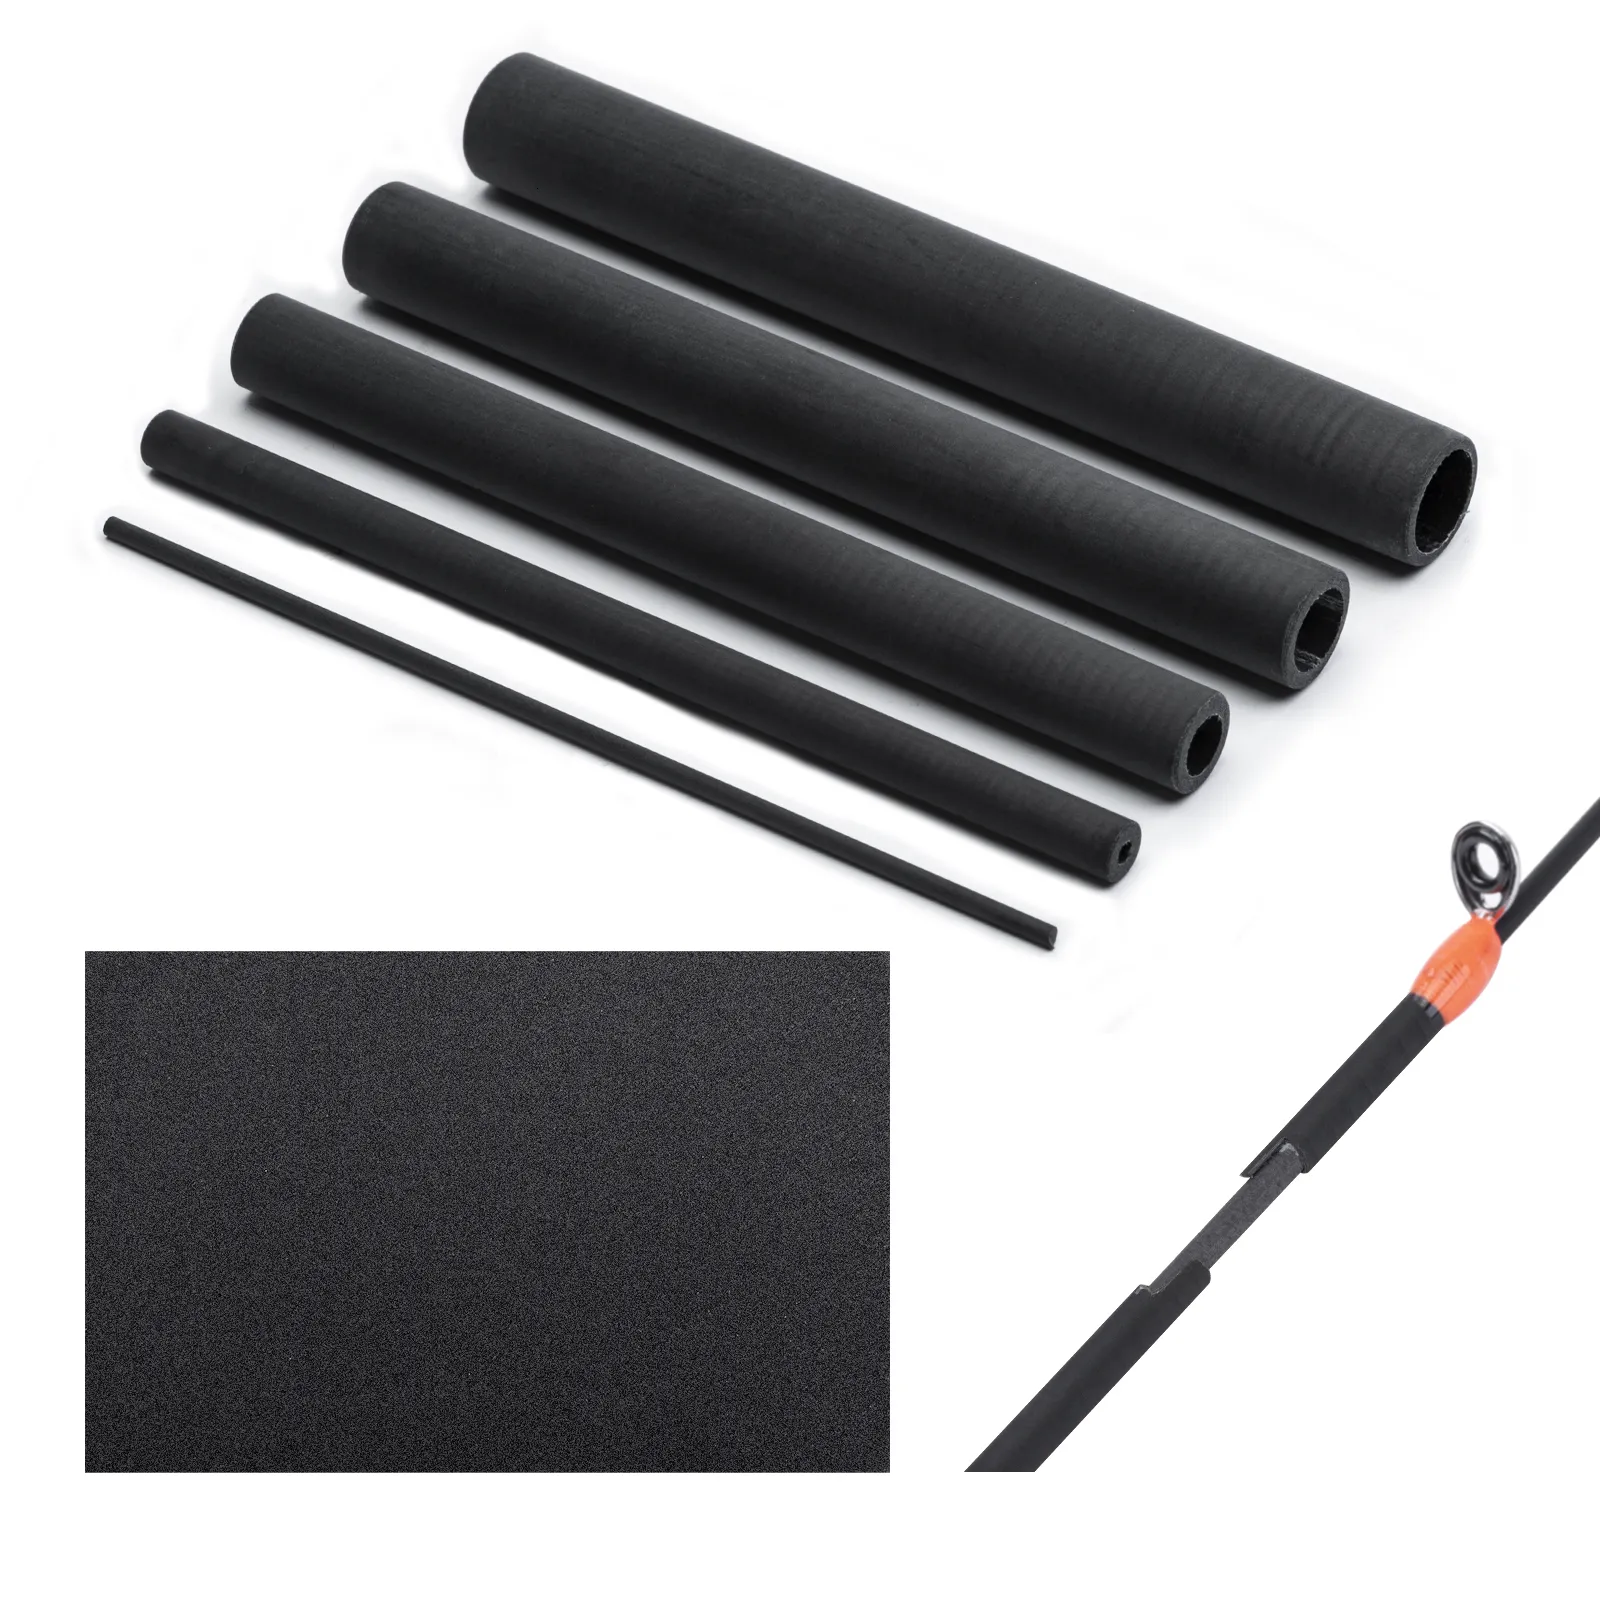 Goture Rod Repair Kit With Telescopic Fishing Gaff, Spinning Casting  Accessories, 11cm Carbon Fiber Stick, Sandpaper Fixing Tool 5 Sizes  Available 230609 From Ren05, $9.87